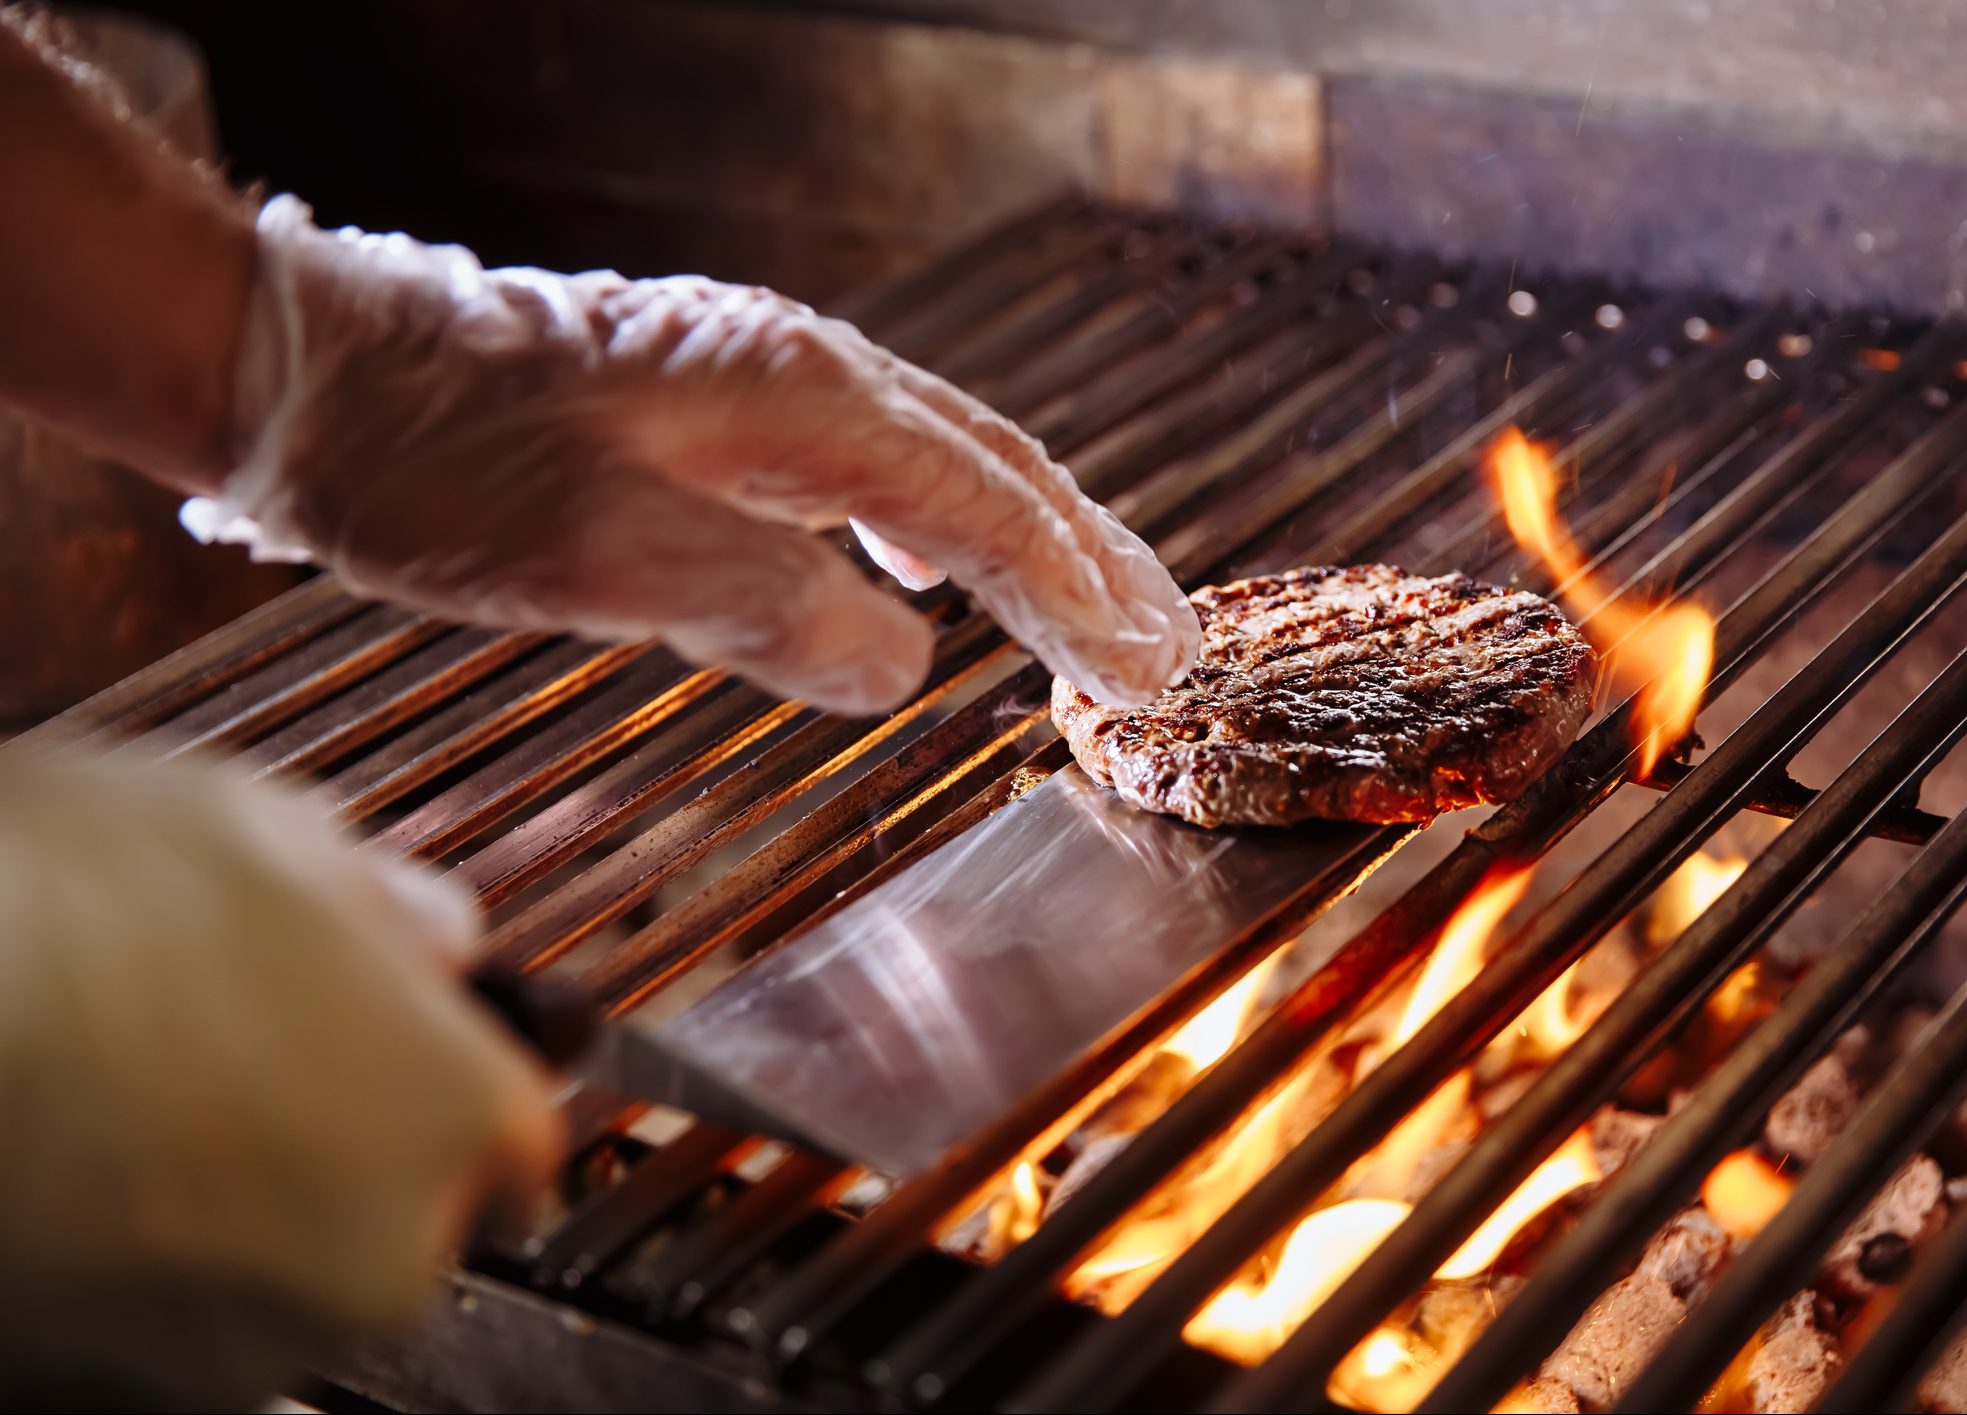 FUNIBER-chef-making-burger-beef-or-pork-meat-barbecue-burgers-for-hamburger-prepared-grilled-on-bbq-fire-flame-grill-close-up-shot-of-chefs-hands-turn-the-chop-on-the-grill